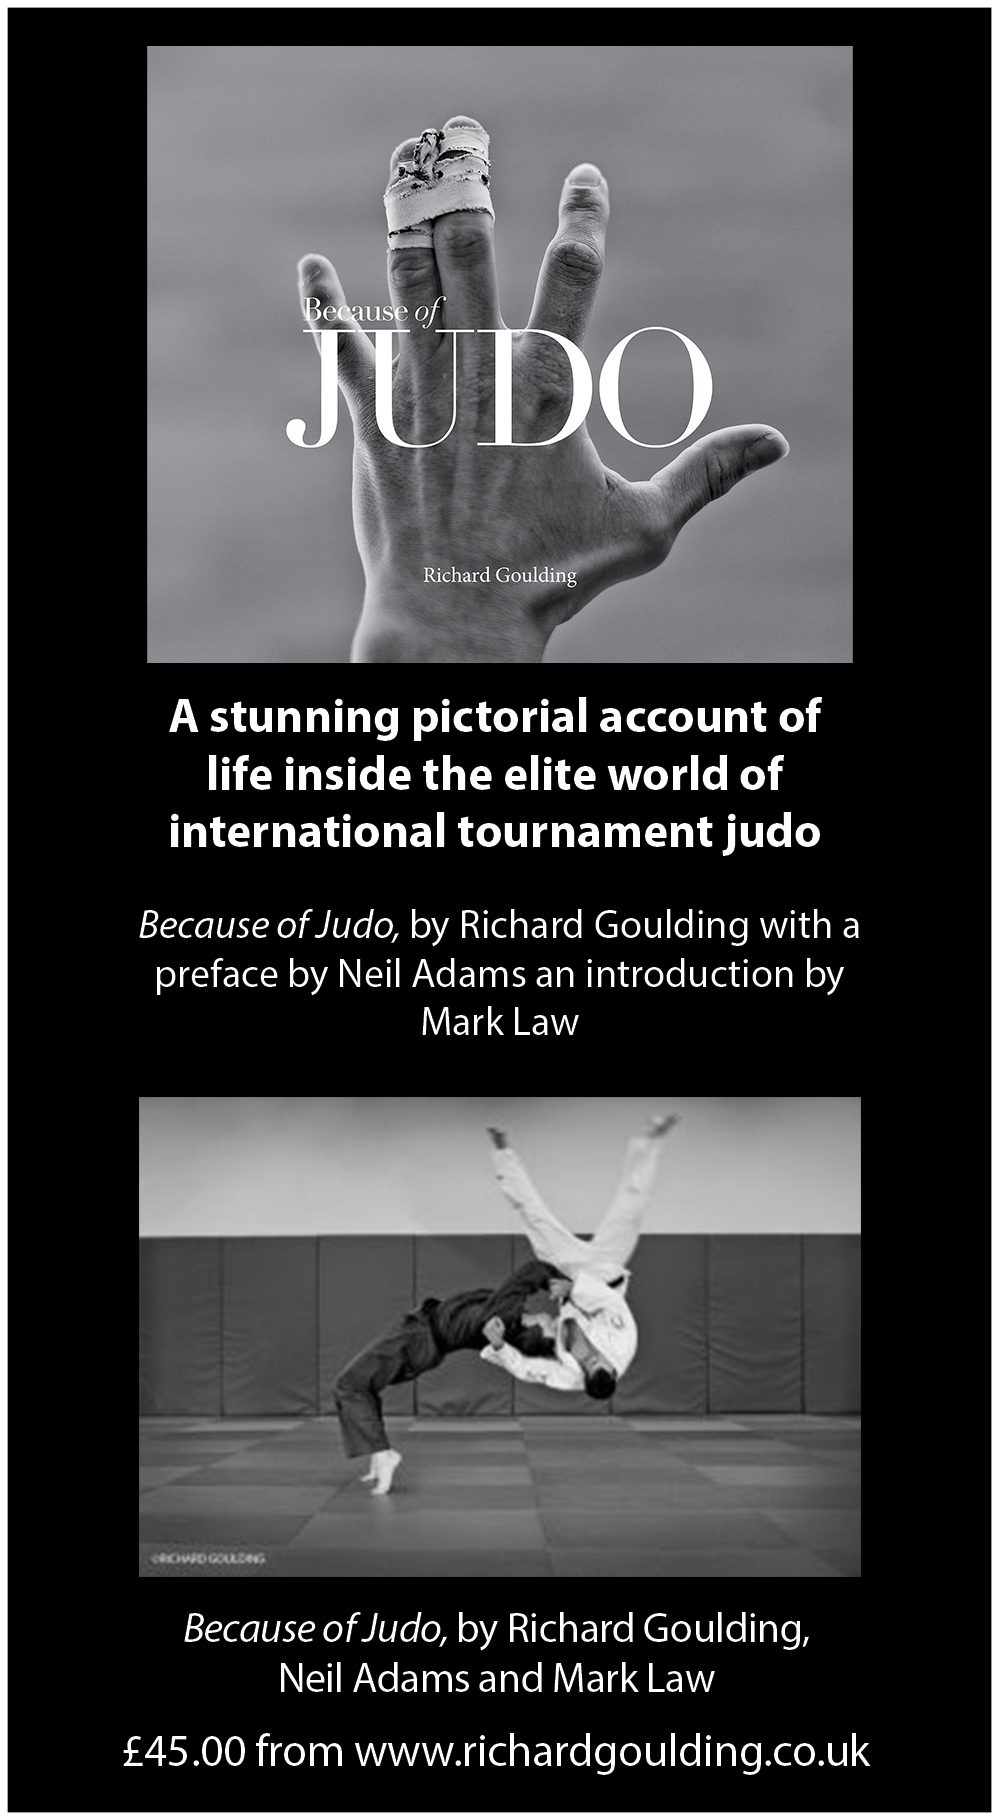 Book: Because of Judo by Richard Goulding, with text by Neil Adams MBE, and Introduction written by Mark Law.